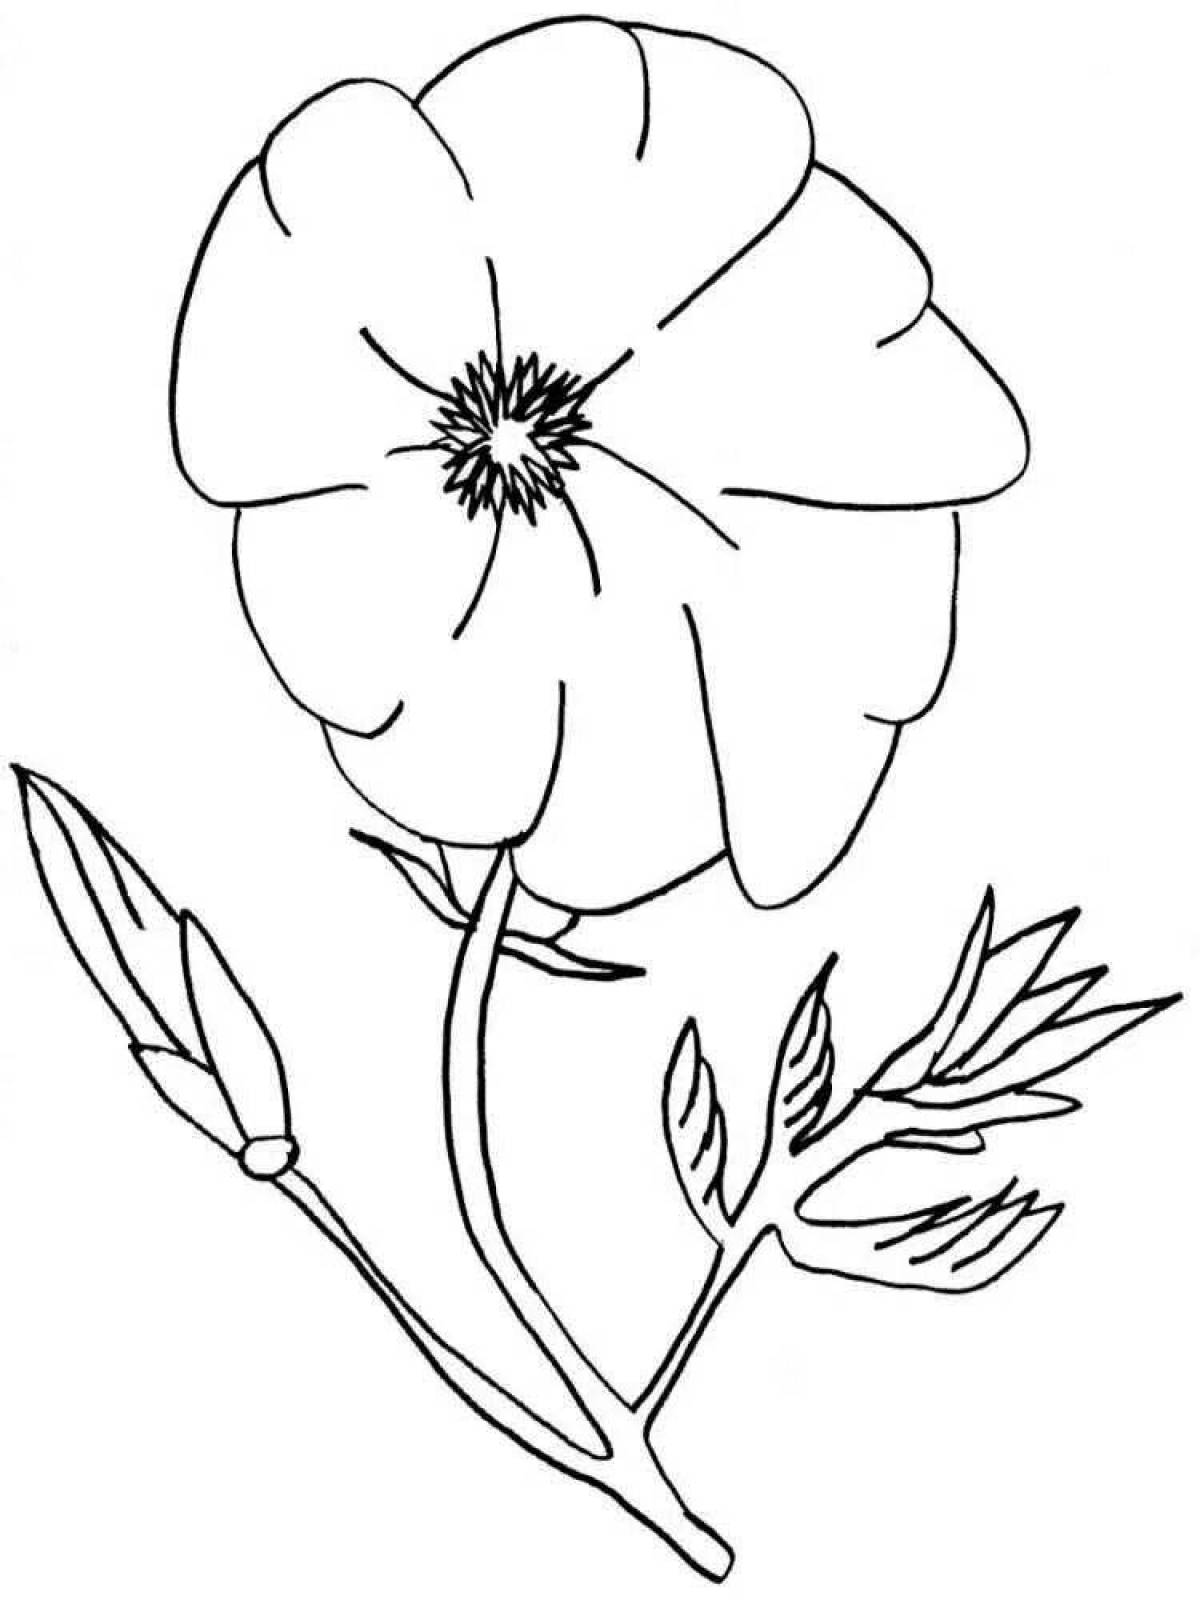 Coloring page charming poppy flower